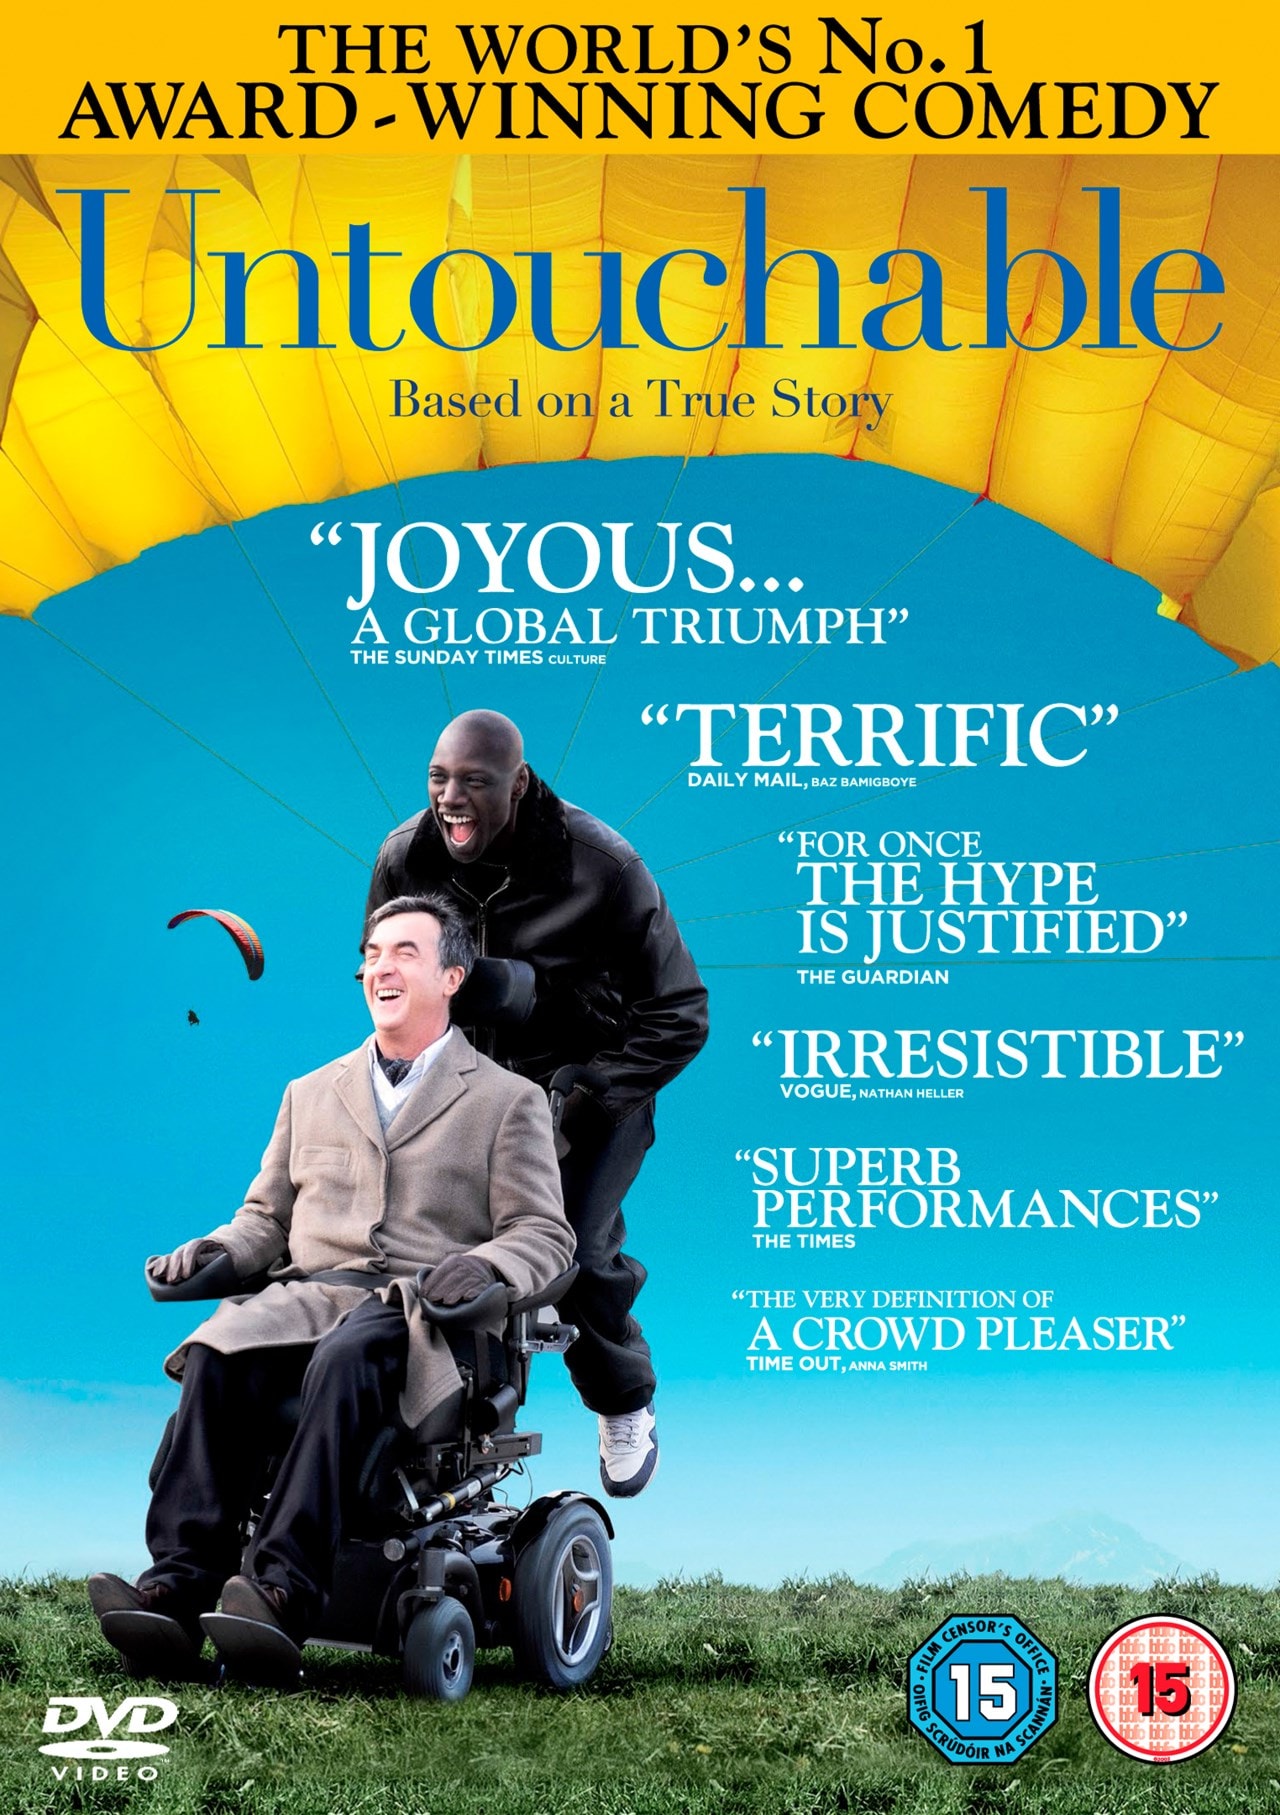 Untouchable | DVD | Free shipping over £20 | HMV Store